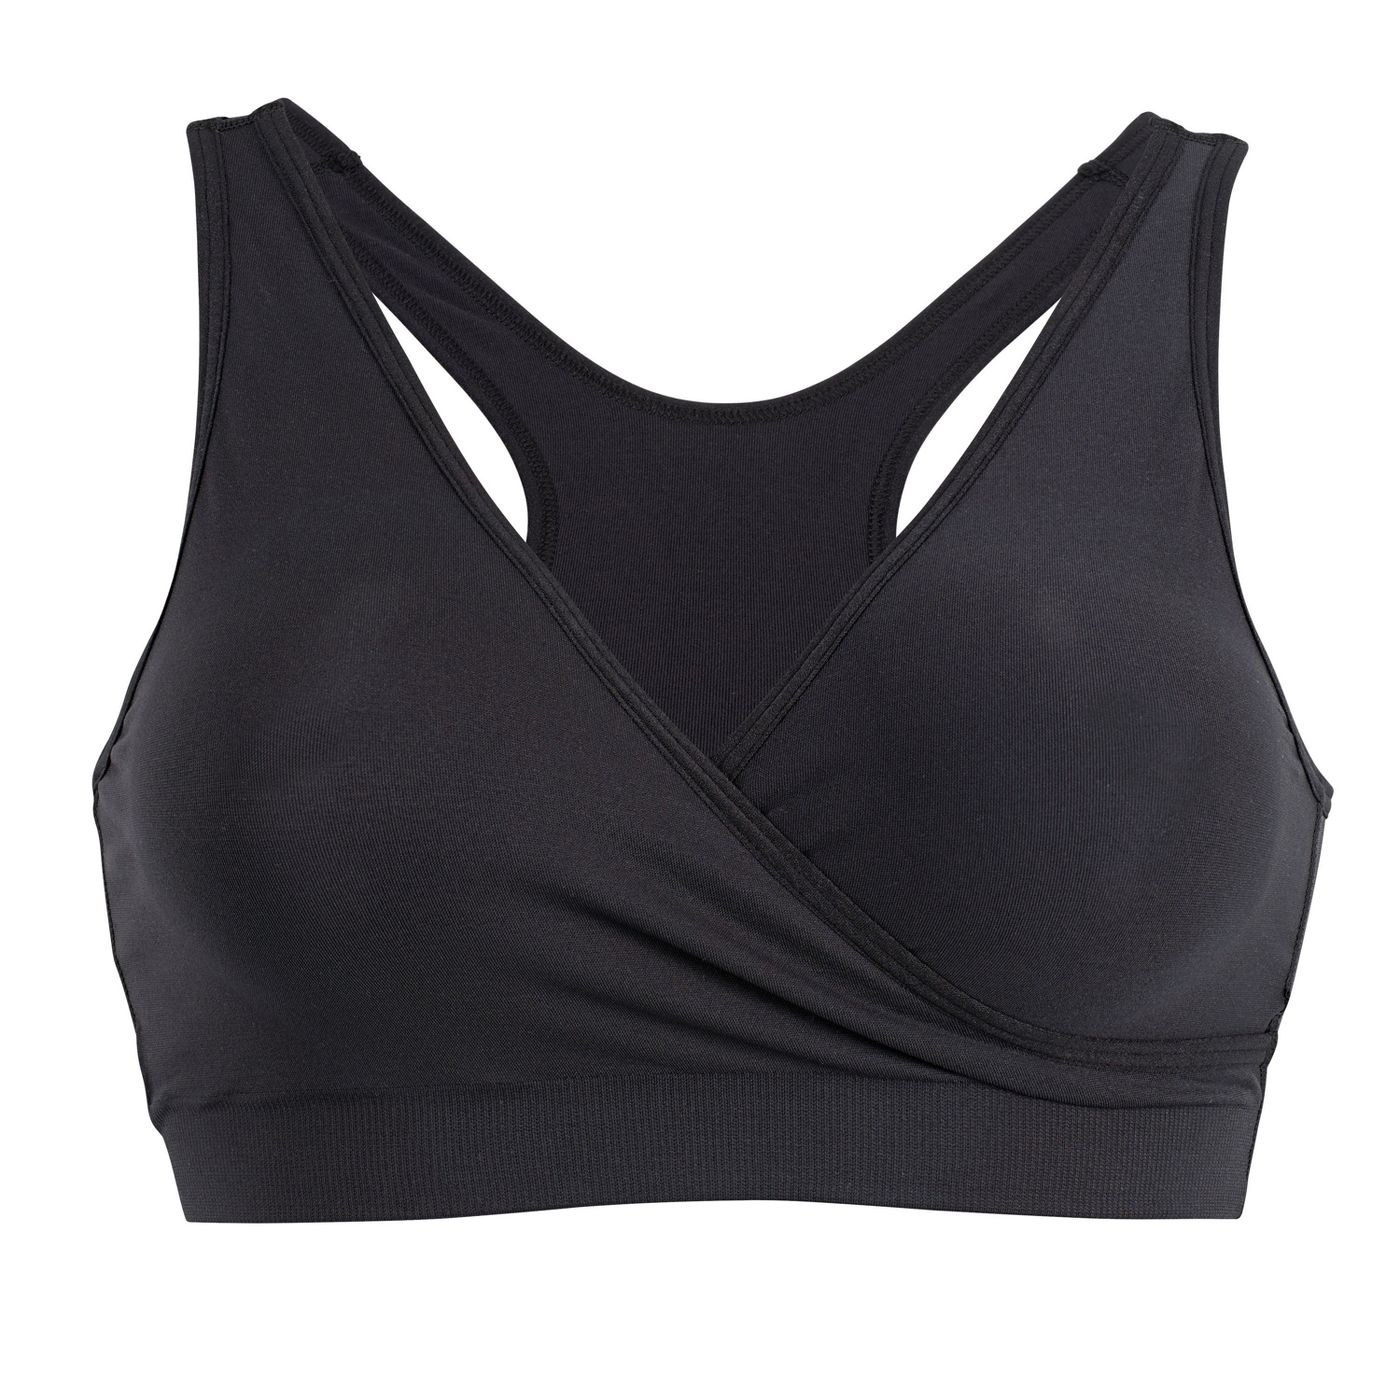 v-neck bra with wrap front that could pull down easily 